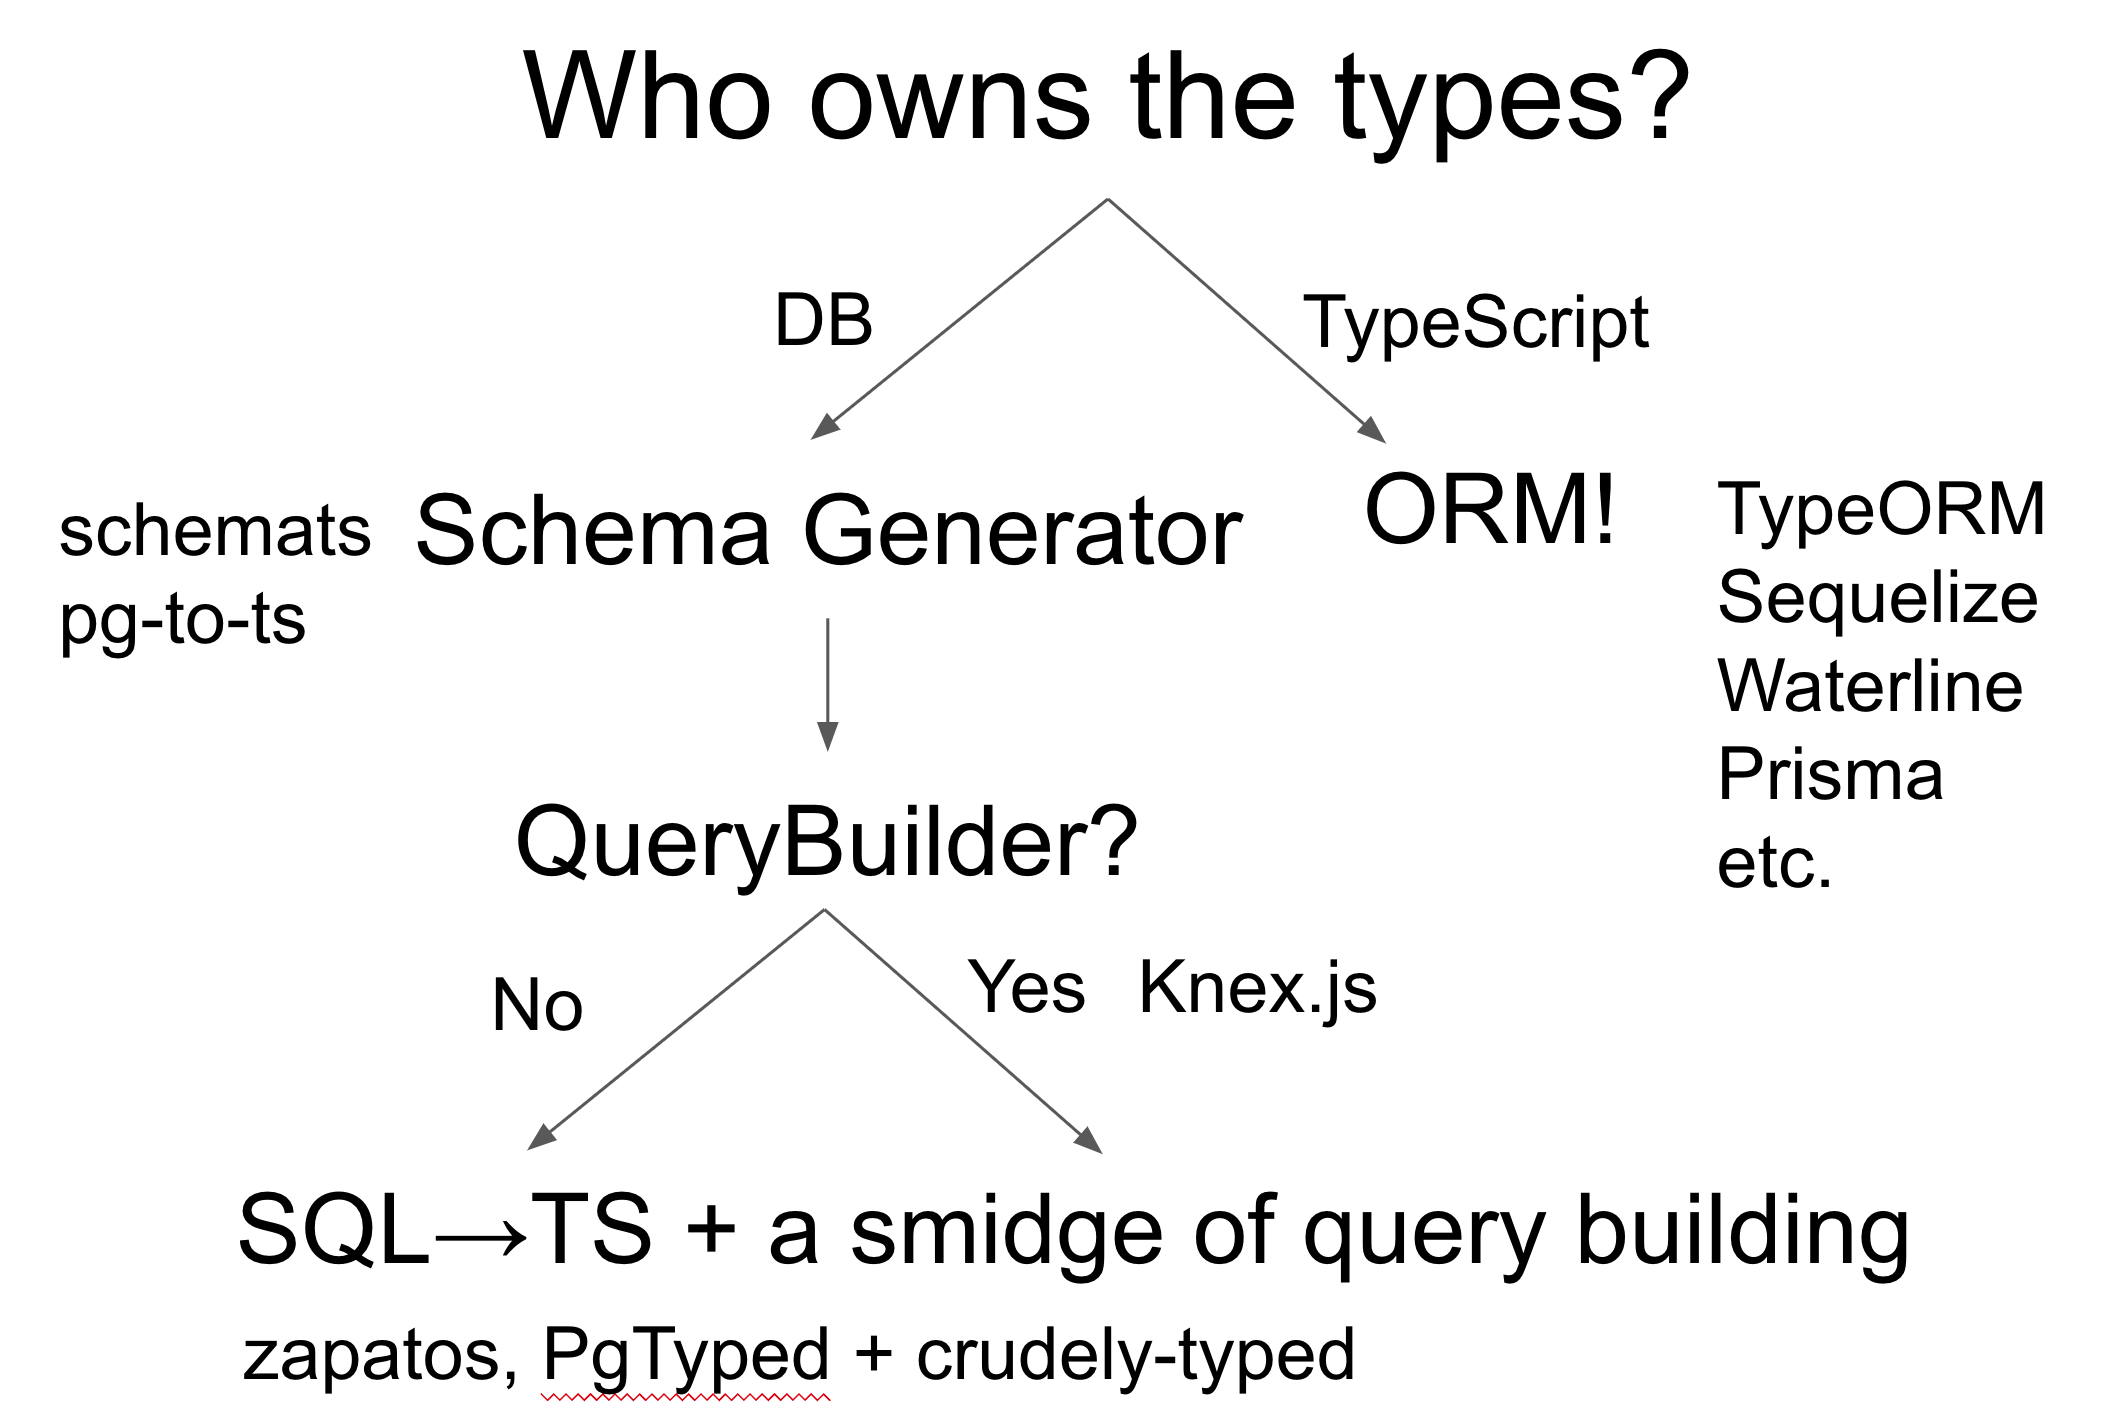 Decision Tree for using TypeScript and SQL